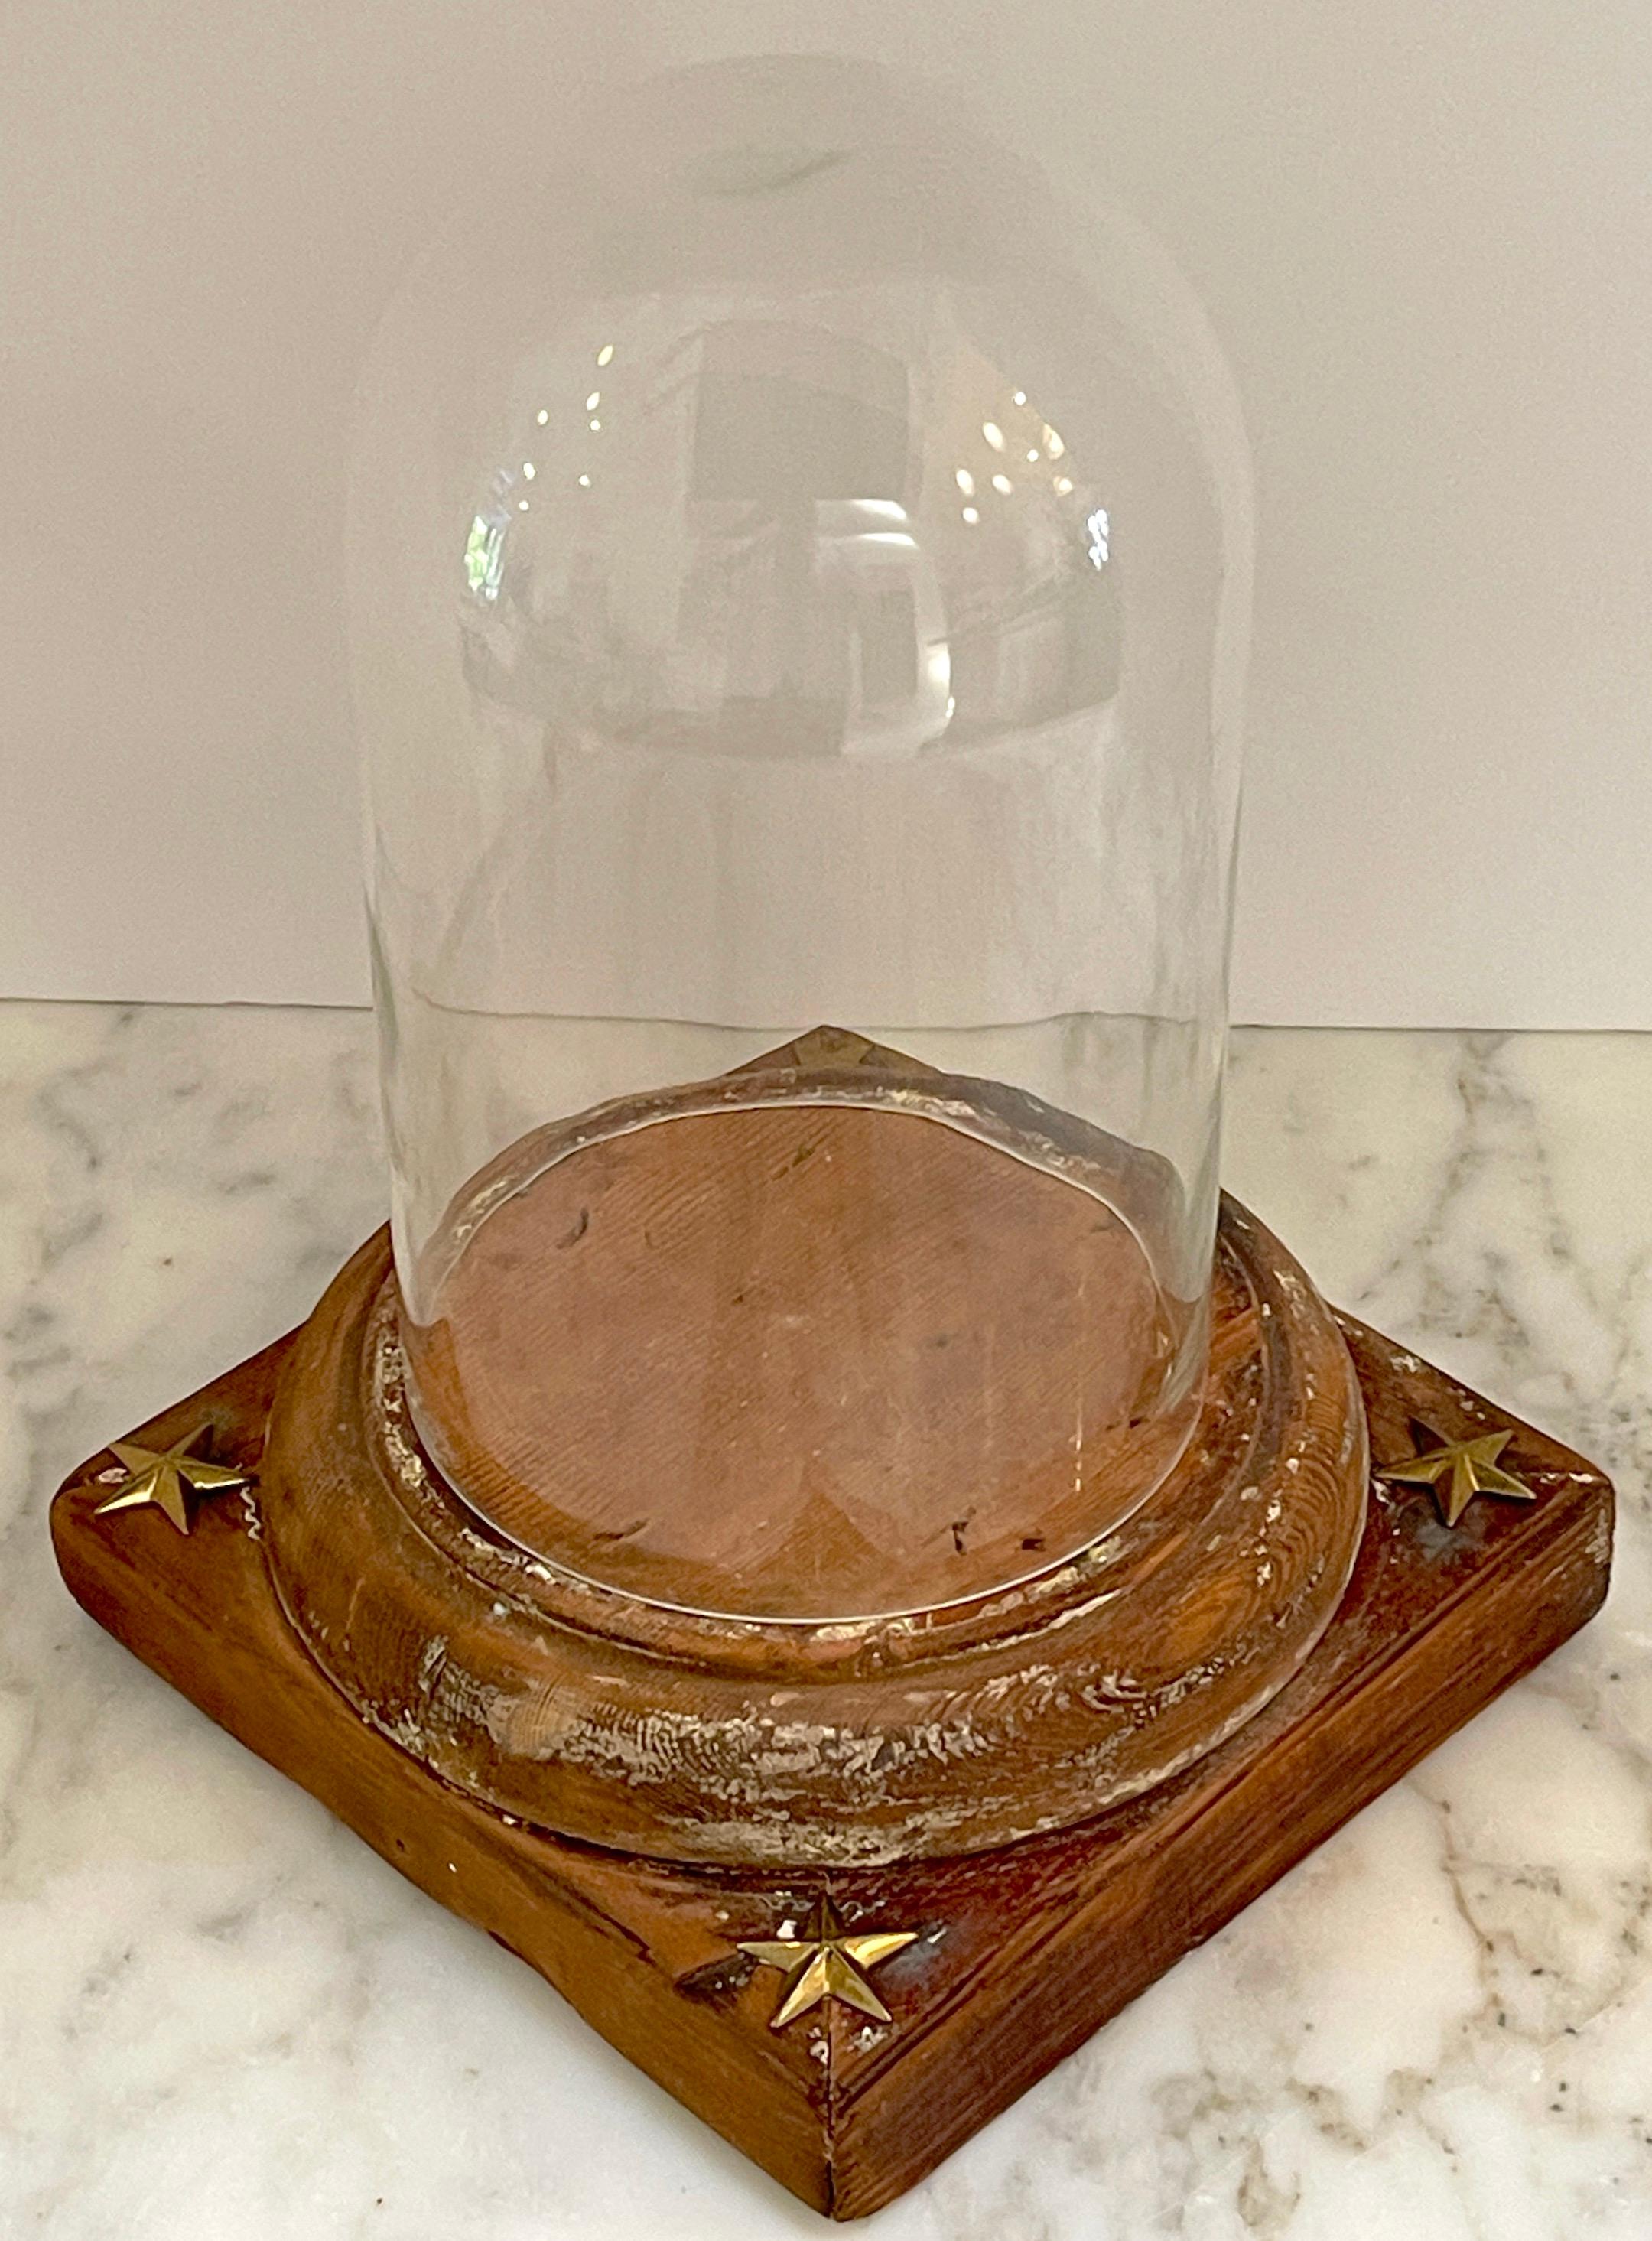 Appliqué 19th Century French Neoclassical Distressed Wood & Glass Cloche/Dome  For Sale